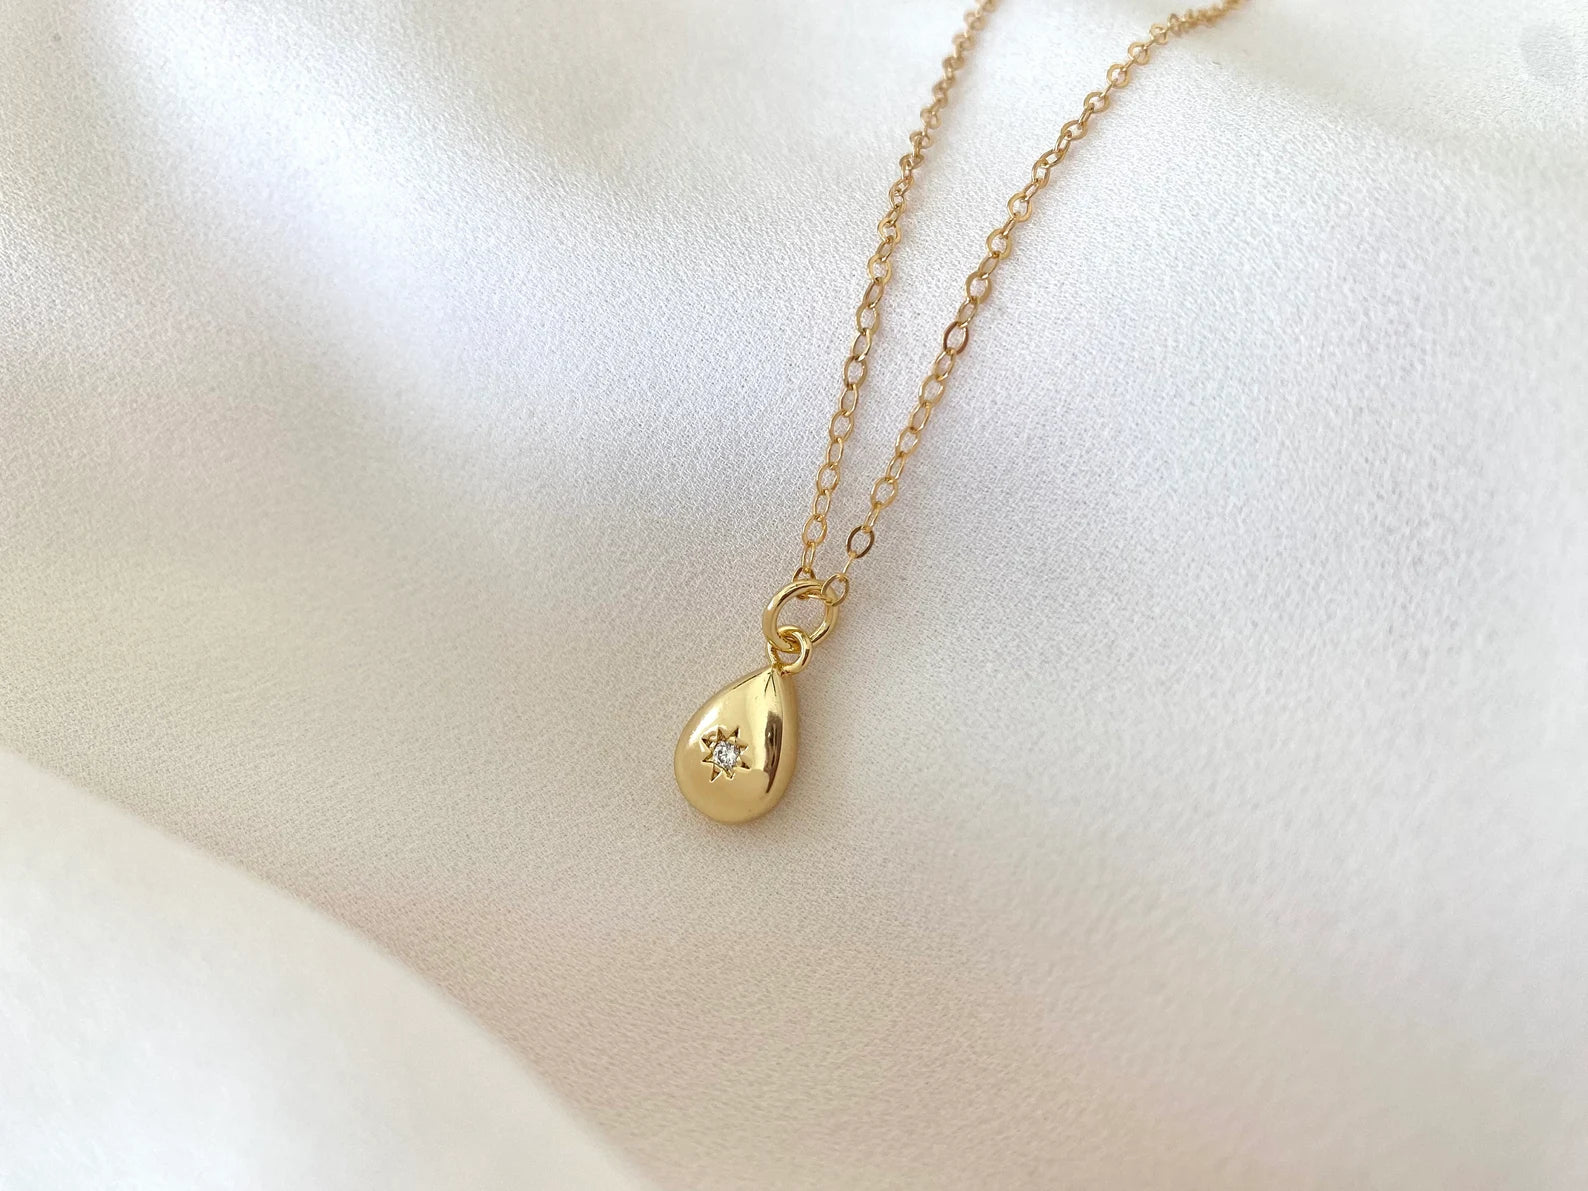 Dainty Gold Filled Teardrop Pendant Necklace with Tiny CZ Crystal Star Gift